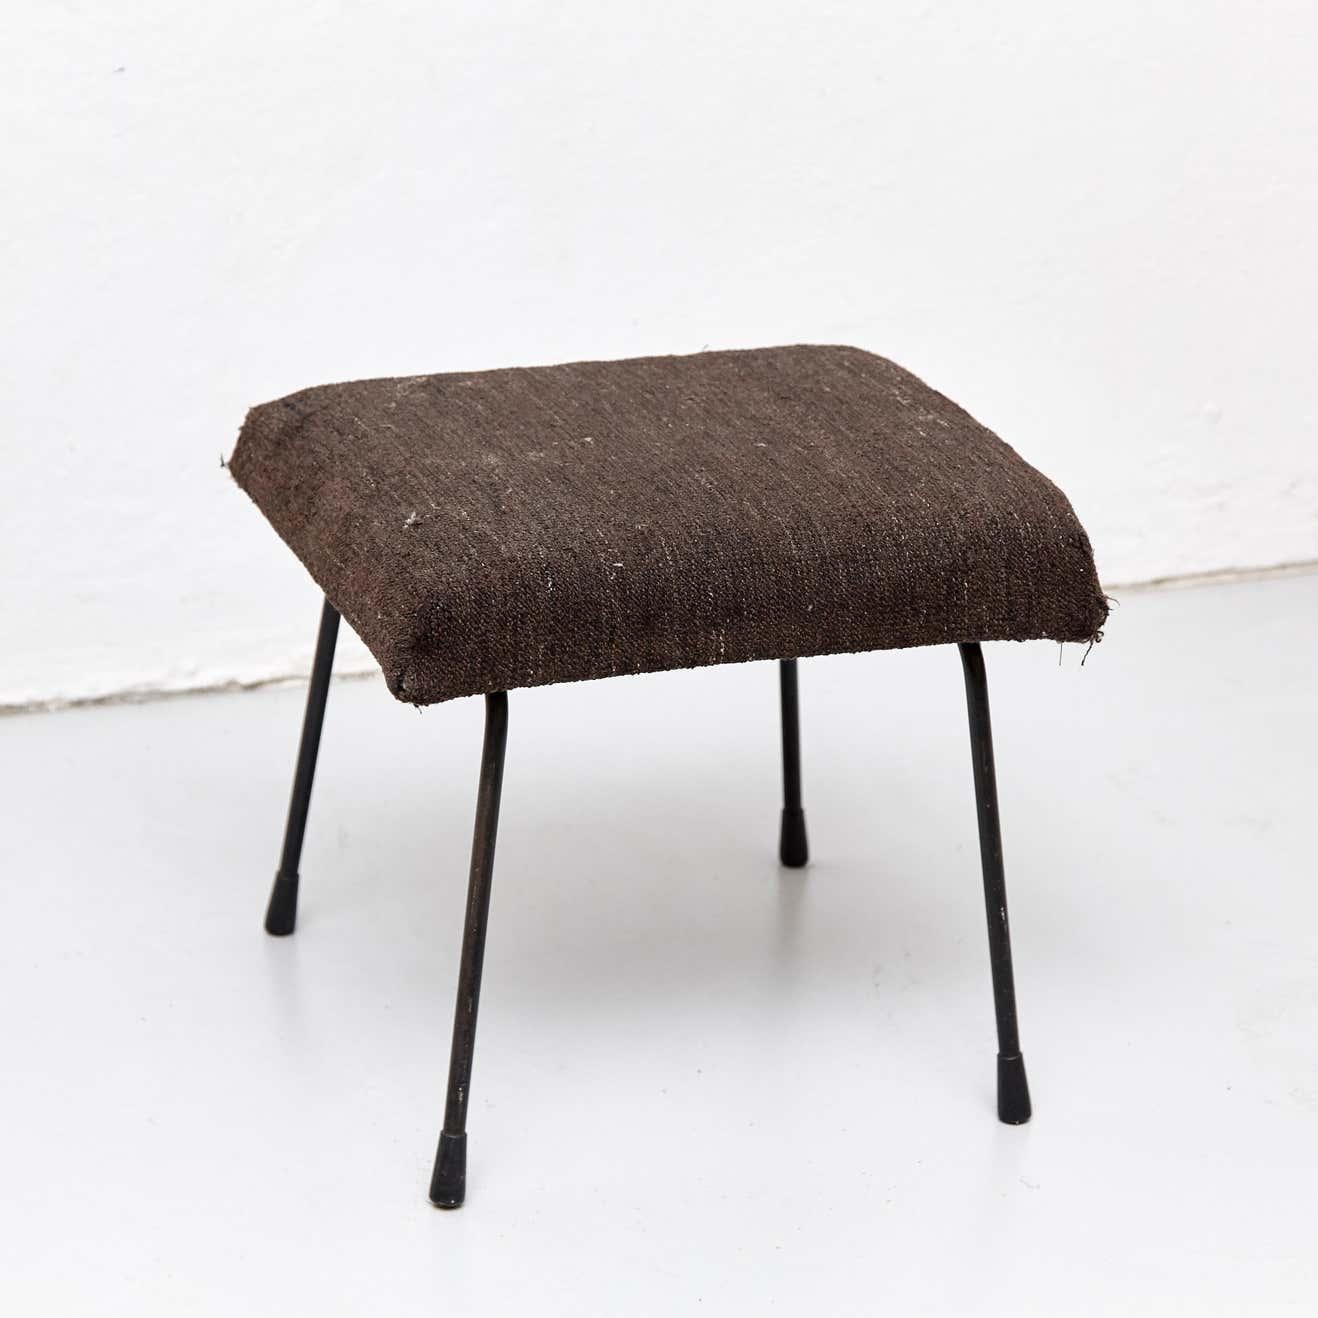 Wim Rietveld Mid-Century Modern Footstool In Fair Condition For Sale In Barcelona, Barcelona